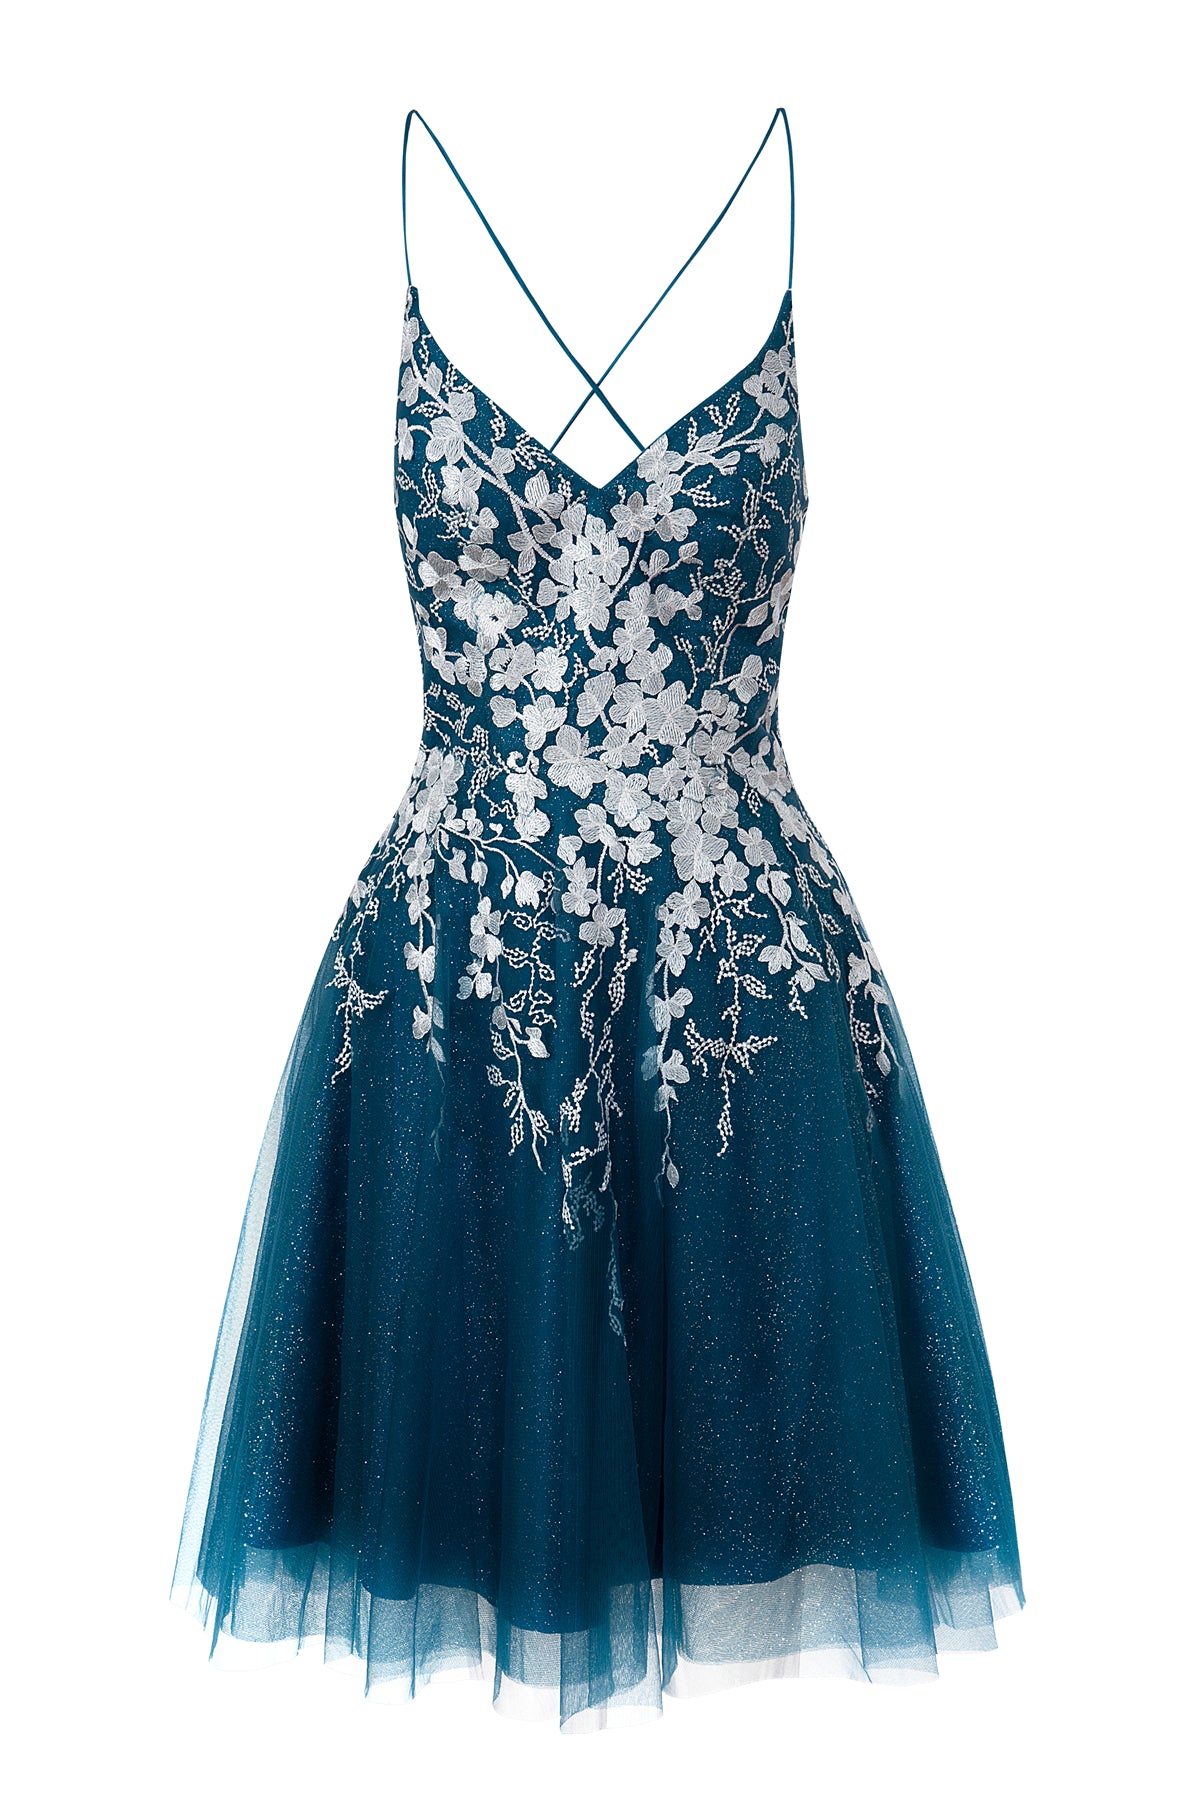 Bella | Aline Short Glitter Tulle Homecoming Dress with Appliques